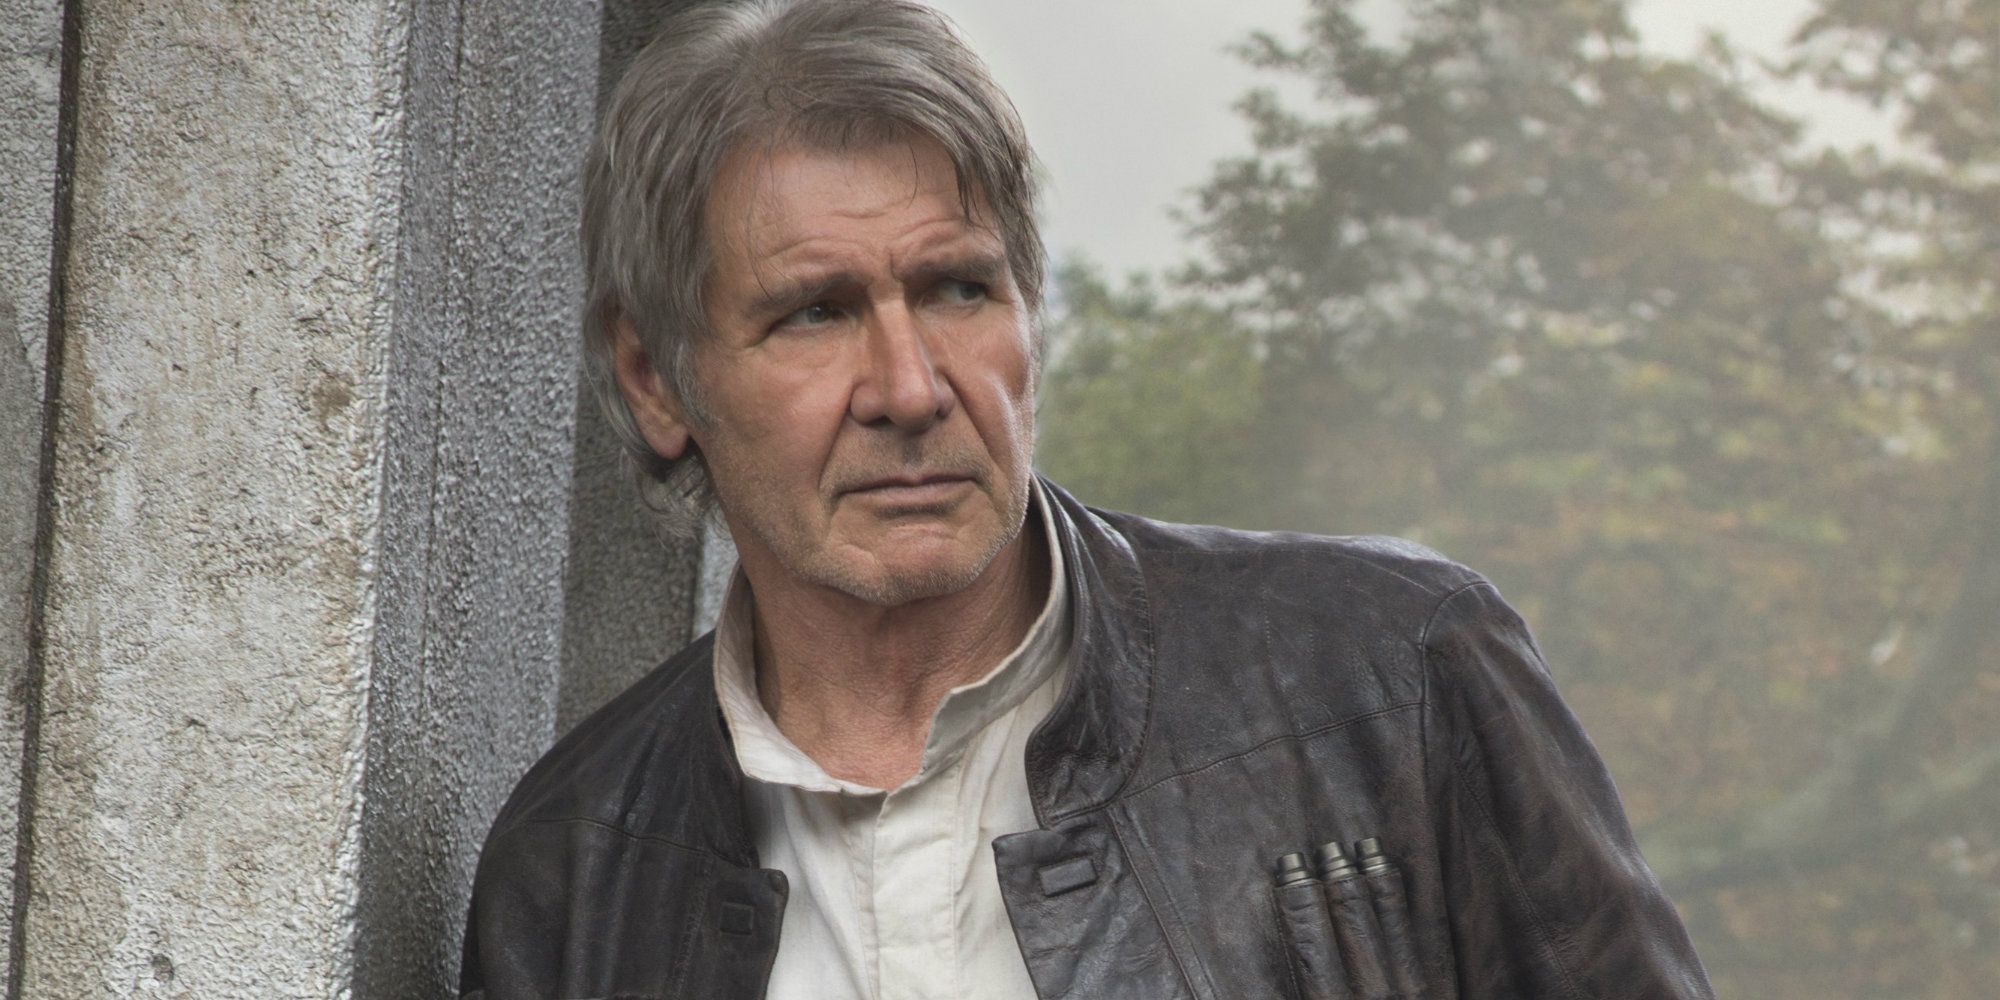 Star Wars: The Last Jedi May Not Directly Address Han’s Death